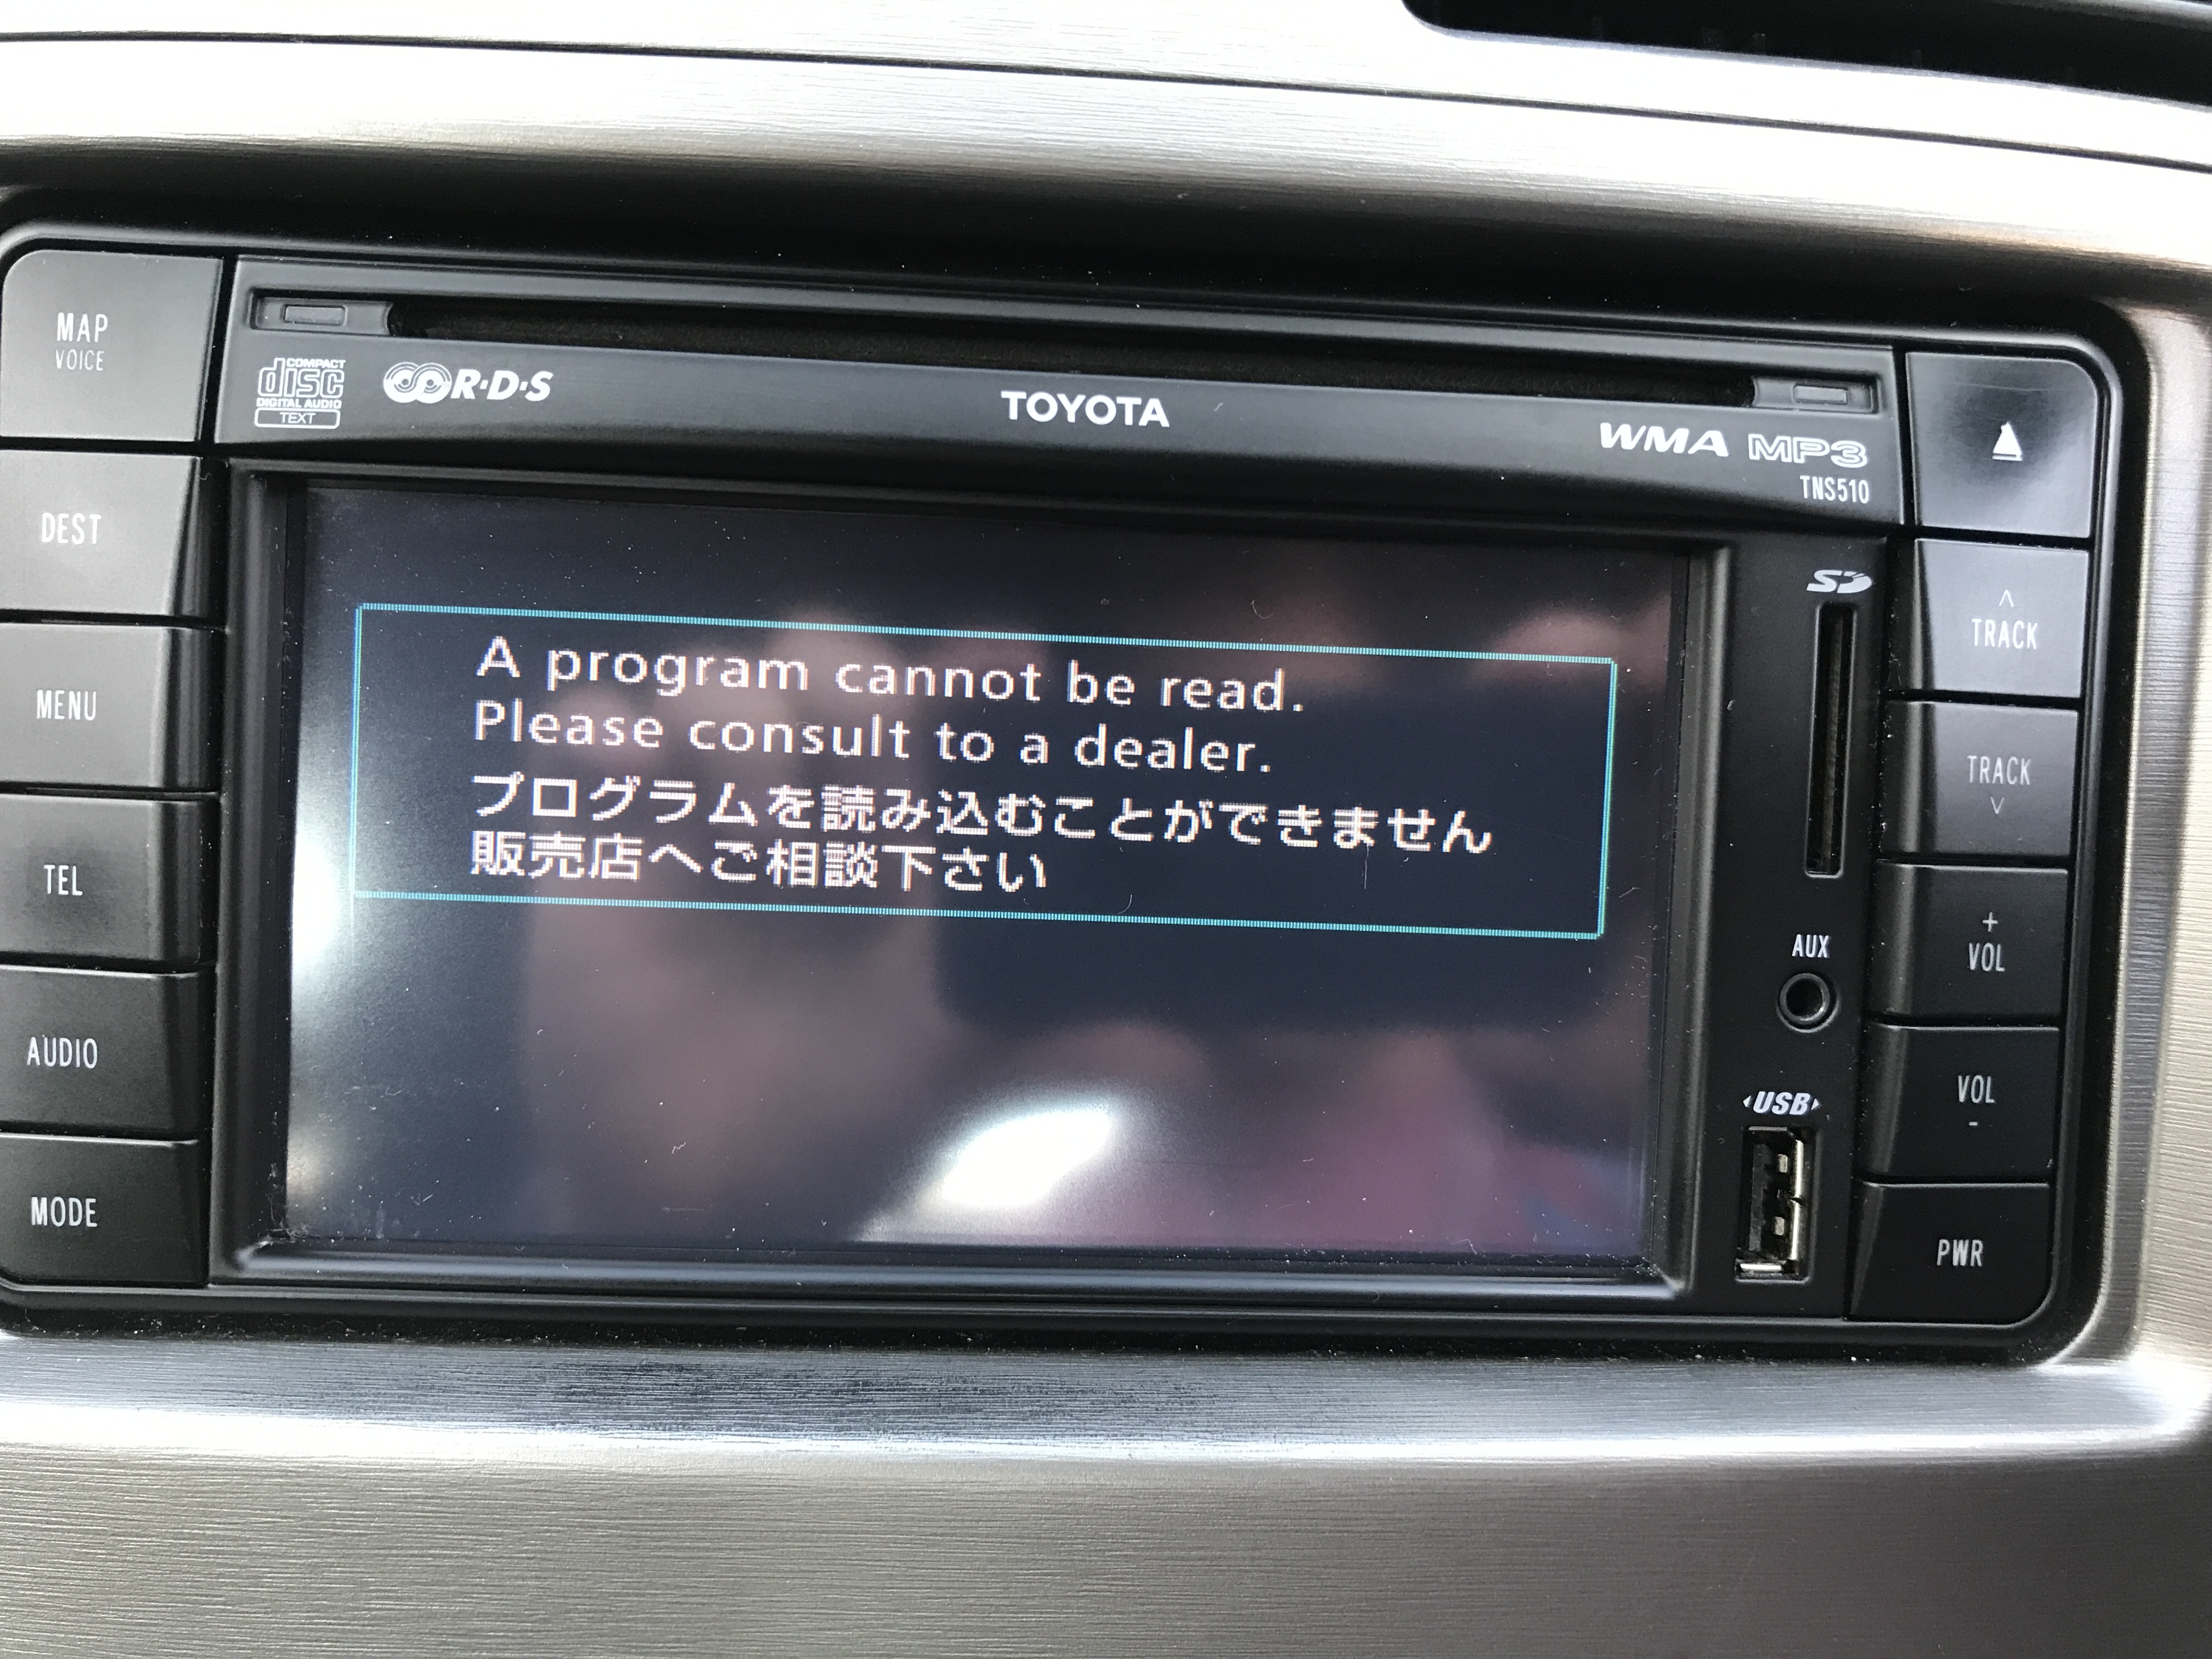 Help Tns 510 Navigation System - Page 10 - IQ Club - Toyota Owners ...